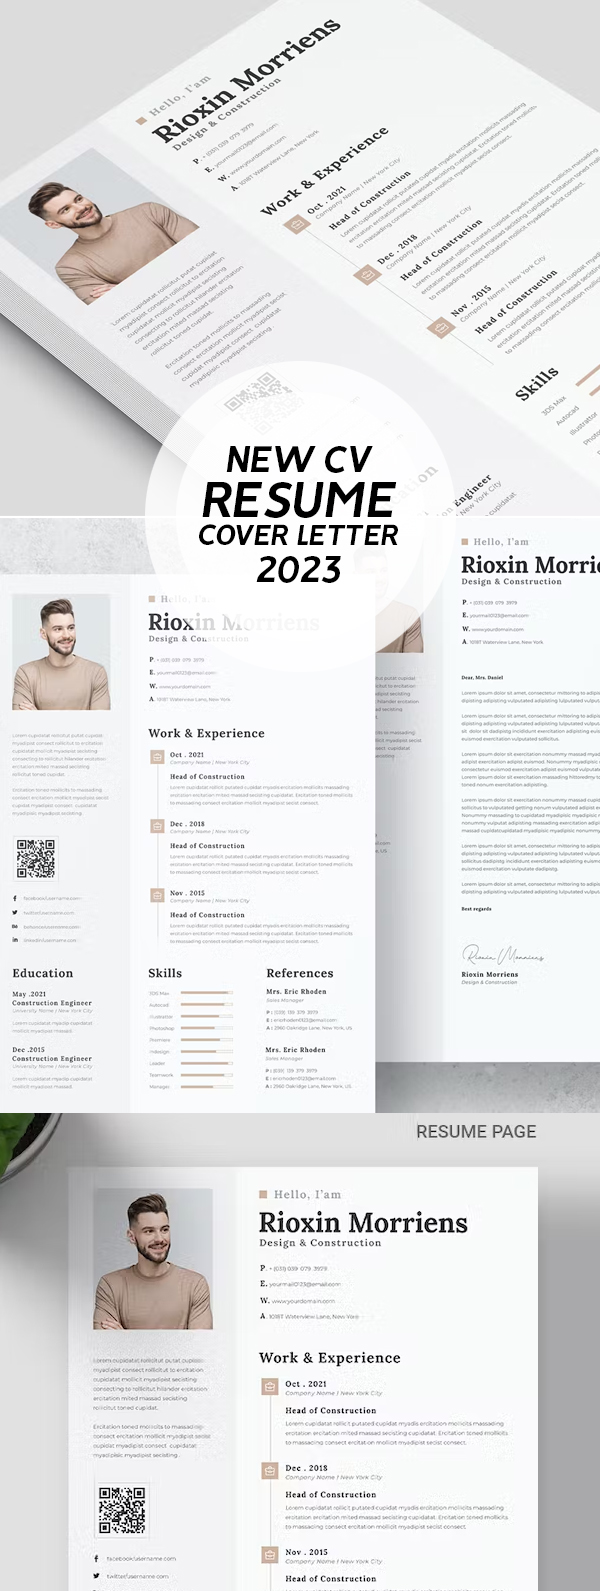 CV Resume and Cover Letter Template